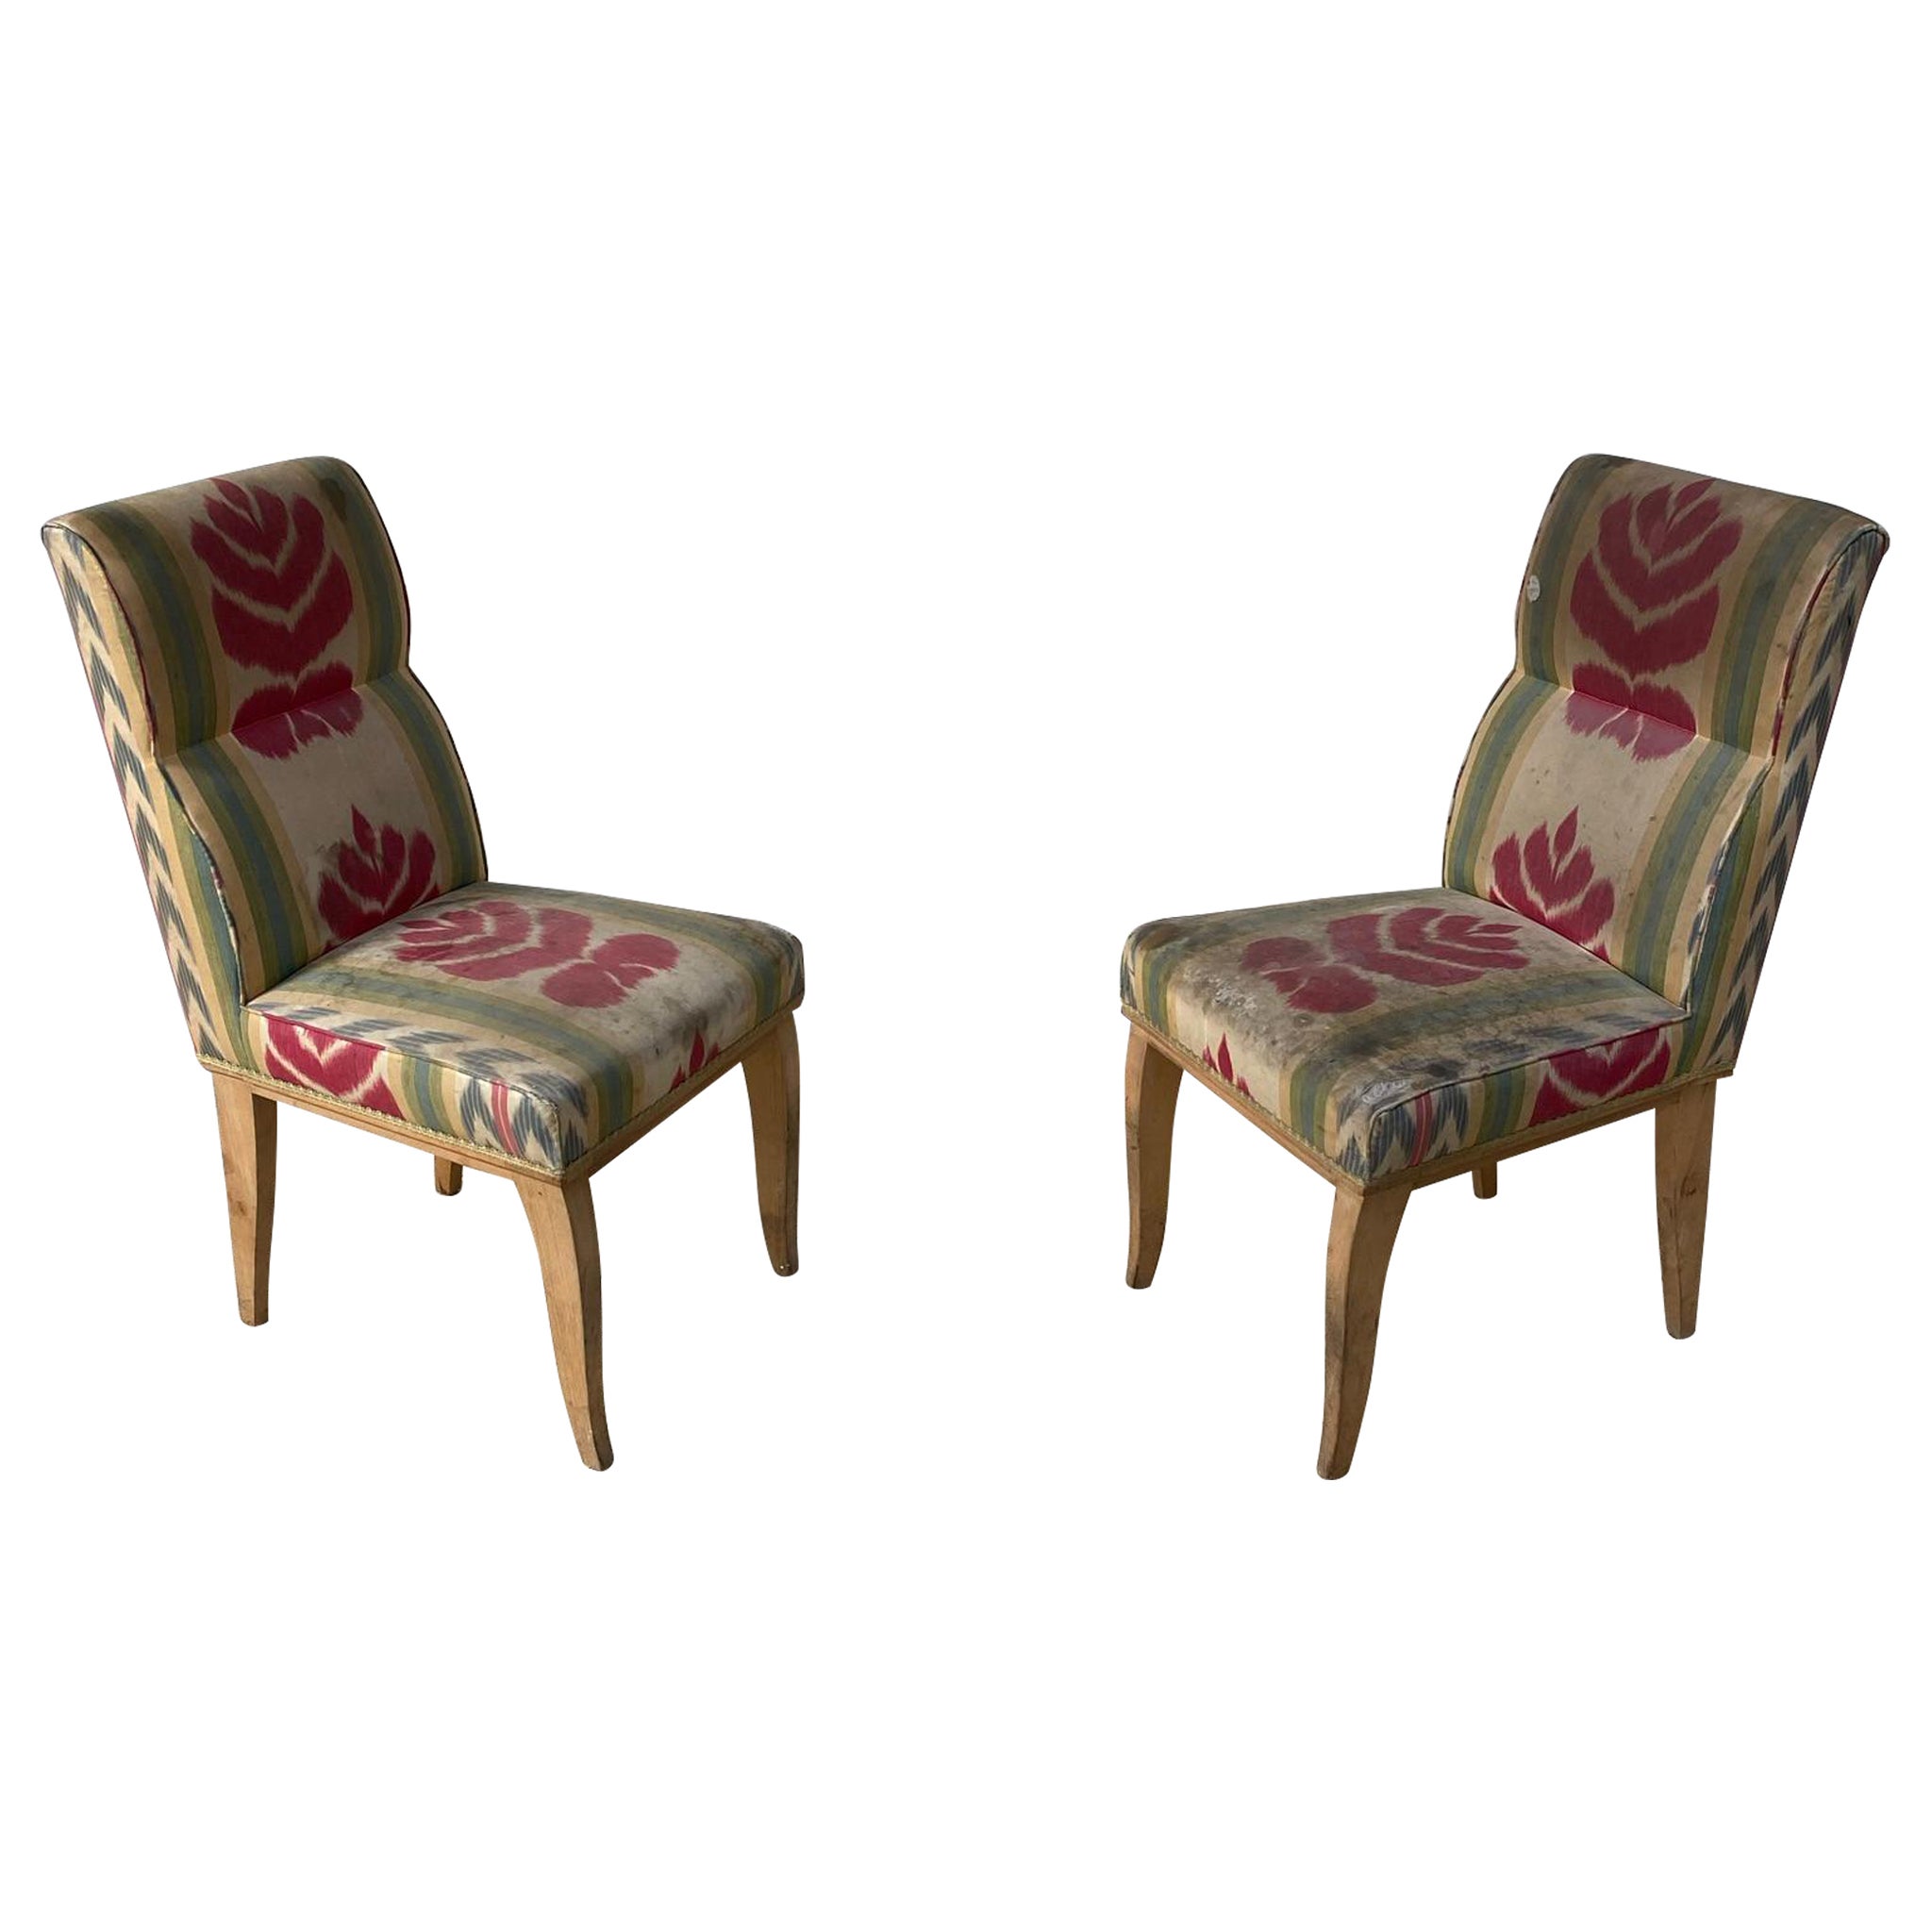 2 Art Deco Chairs in the Style of René Prou, circa 1930